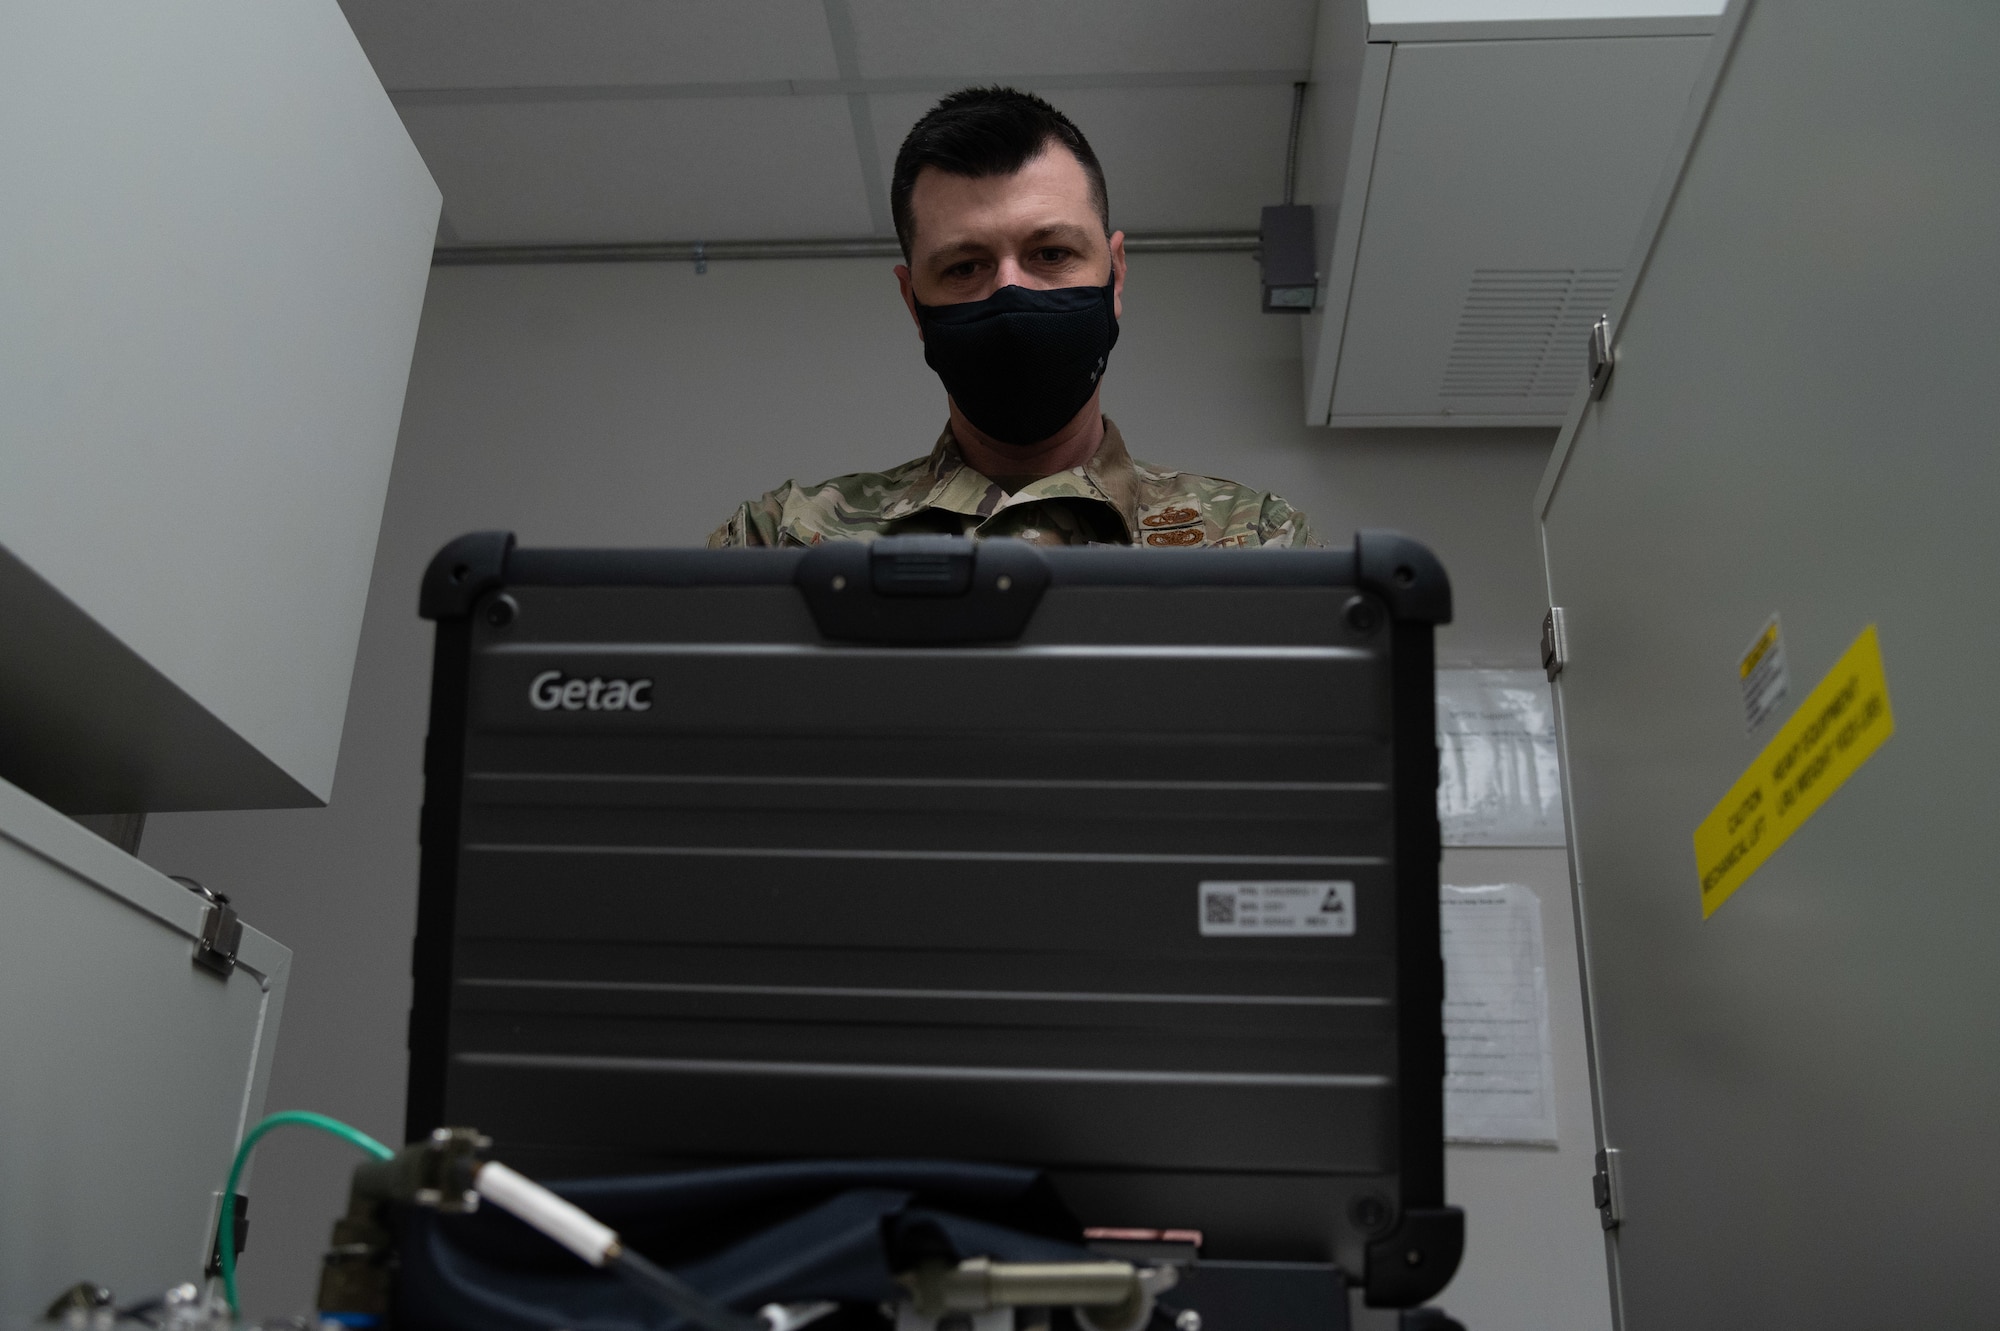 Tech Sgt. Clint Melancon, 307th Bomb Wing non-commissioned officer in-charge of nuclear command, control and communication systems, verifies the Global Aircrew Strategic Network Terminal’s connectivity to the NC3 equipment at Barksdale Air Force Base, Louisiana, Jan. 13, 2021.